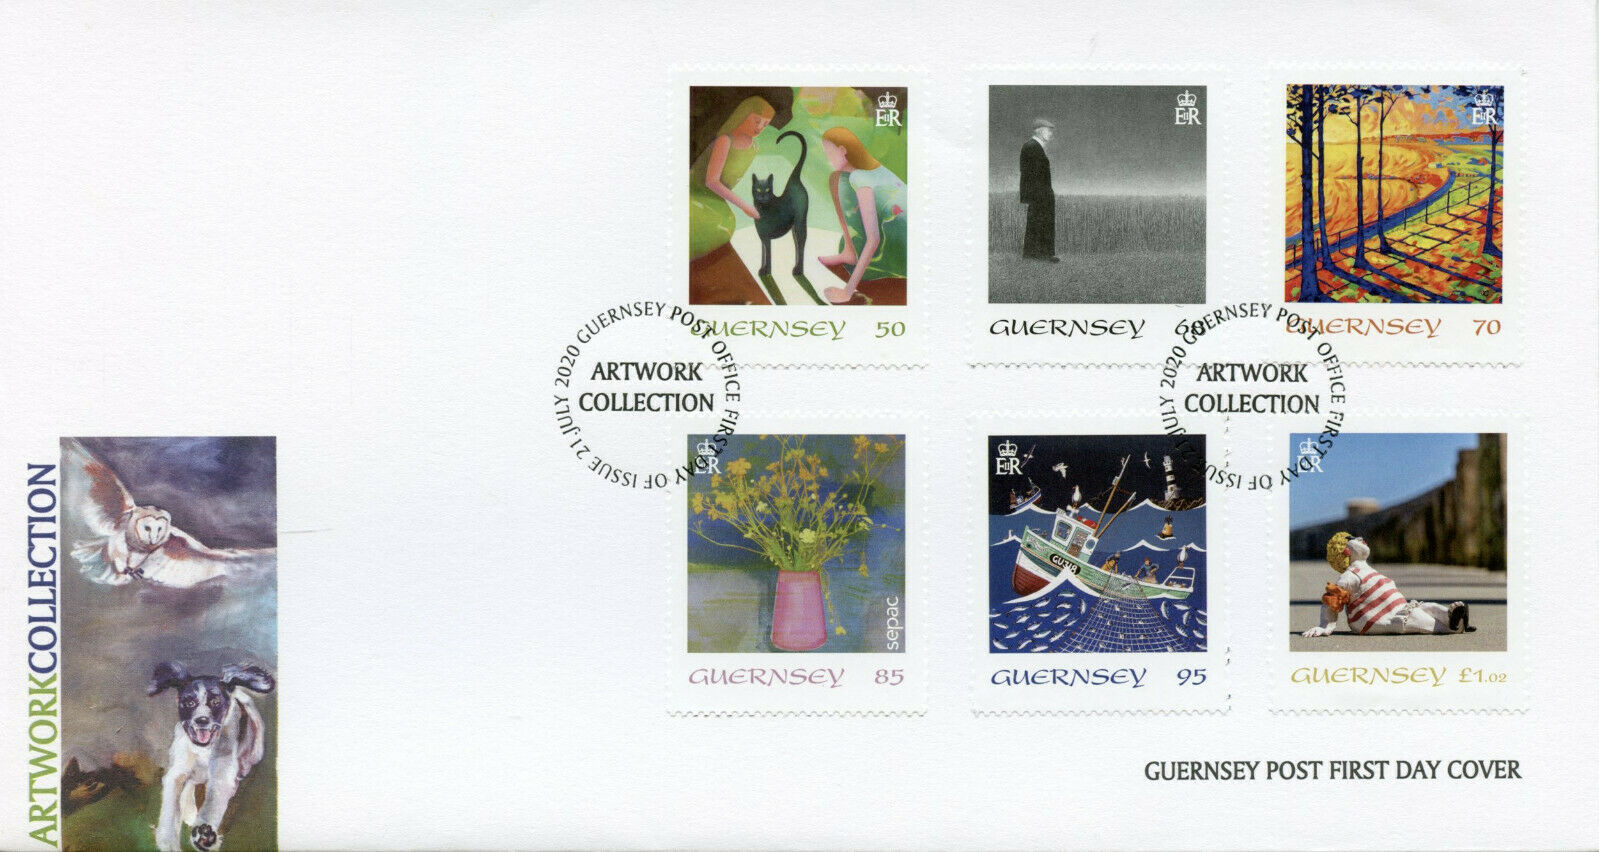 Guernsey Art Stamps 2020 FDC Artwork Collection SEPAC Paintings 6v Set